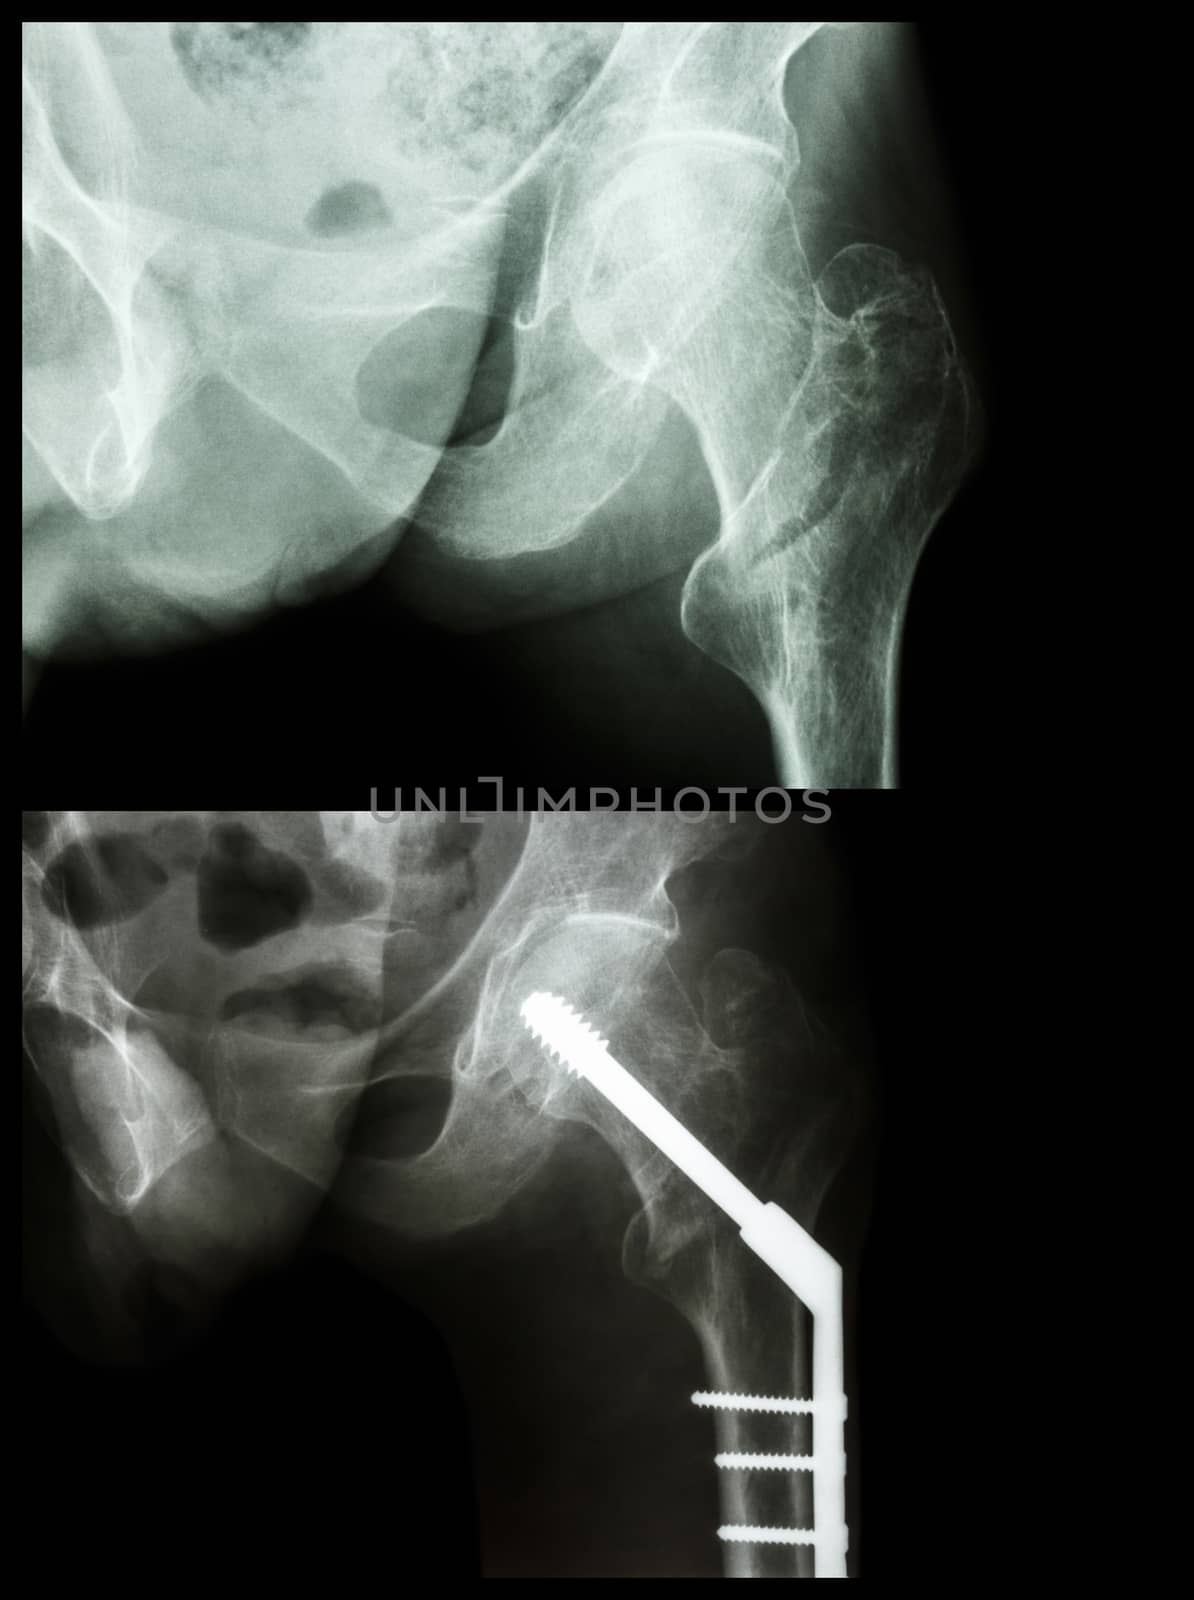 Intertrochanteric fracture left femur (fracture thigh's bone). It was operated and insert intramedullary nail.